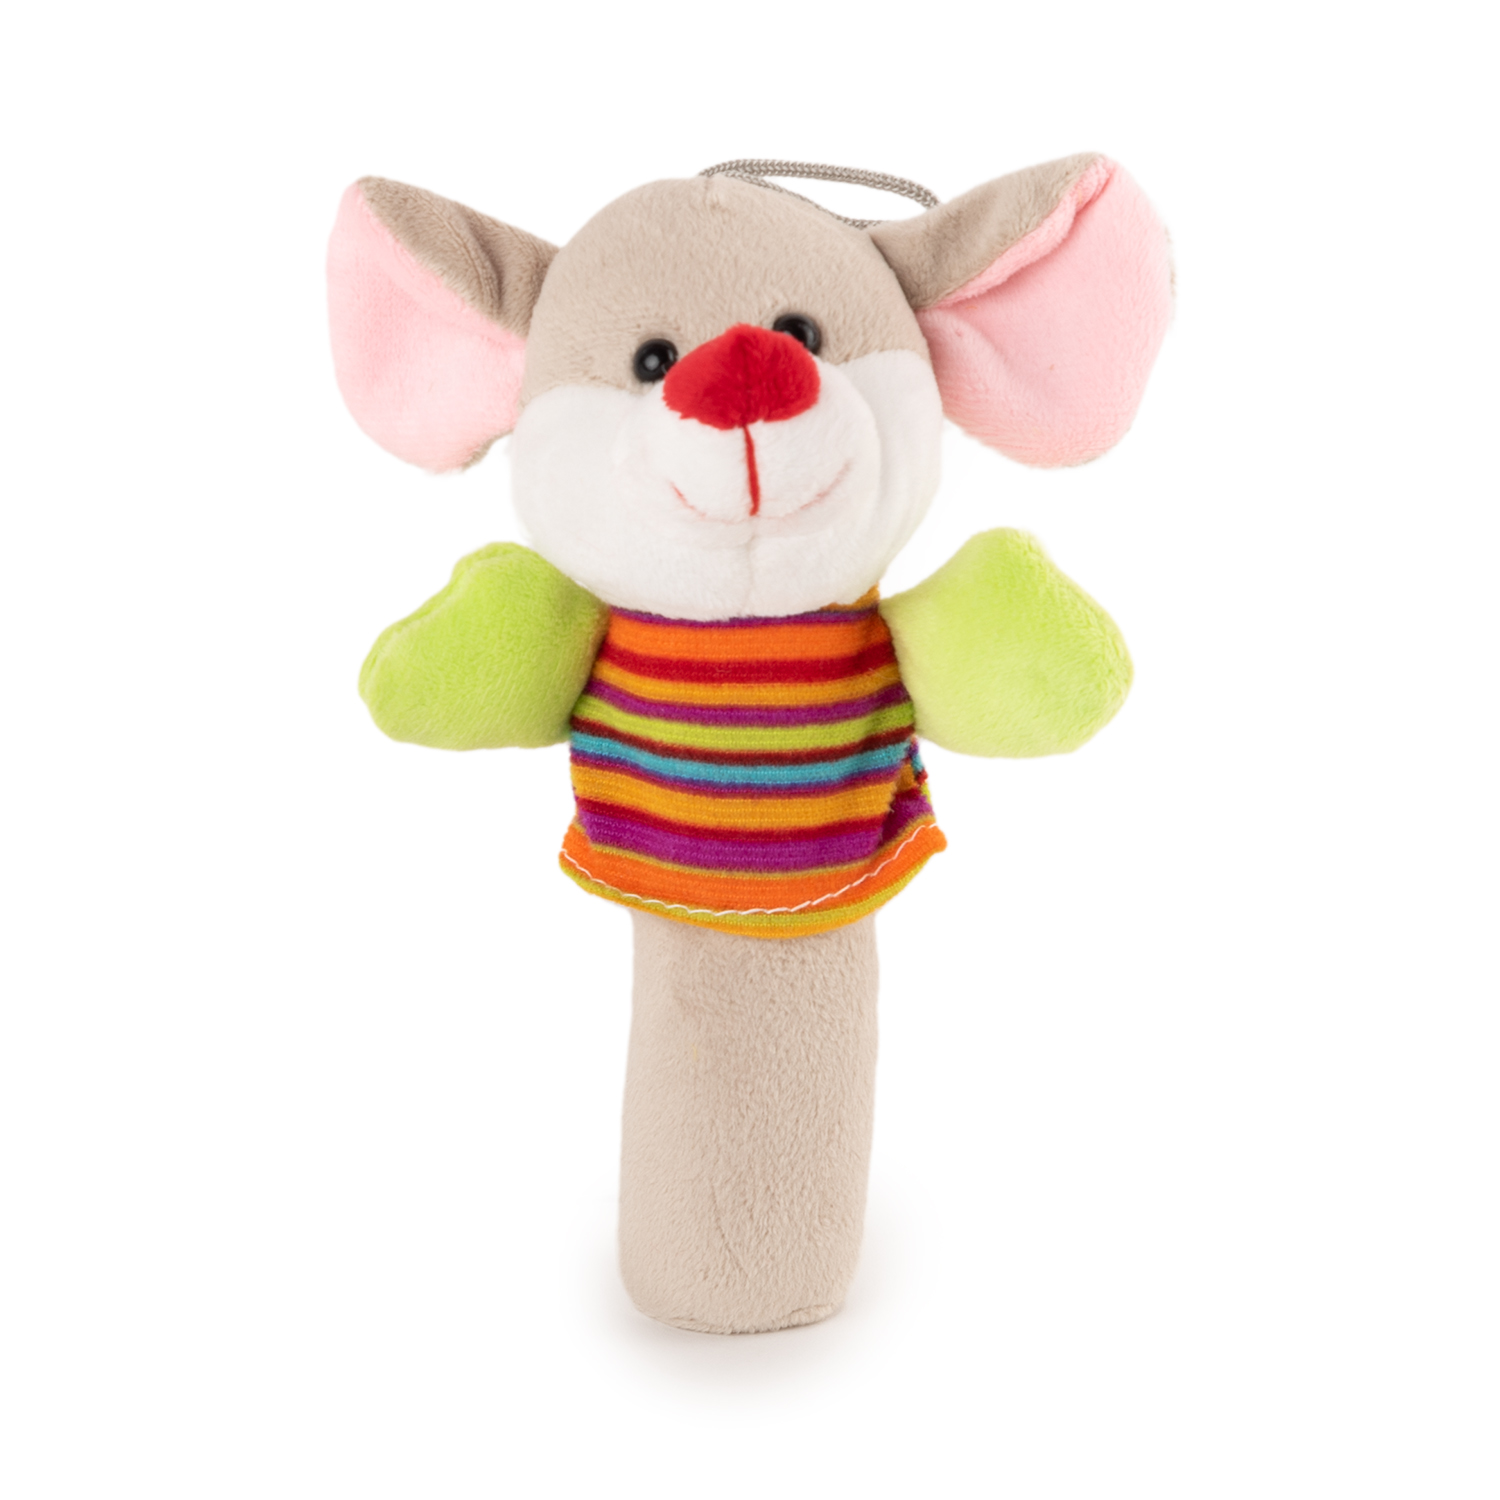 Baby rattle - Mouse